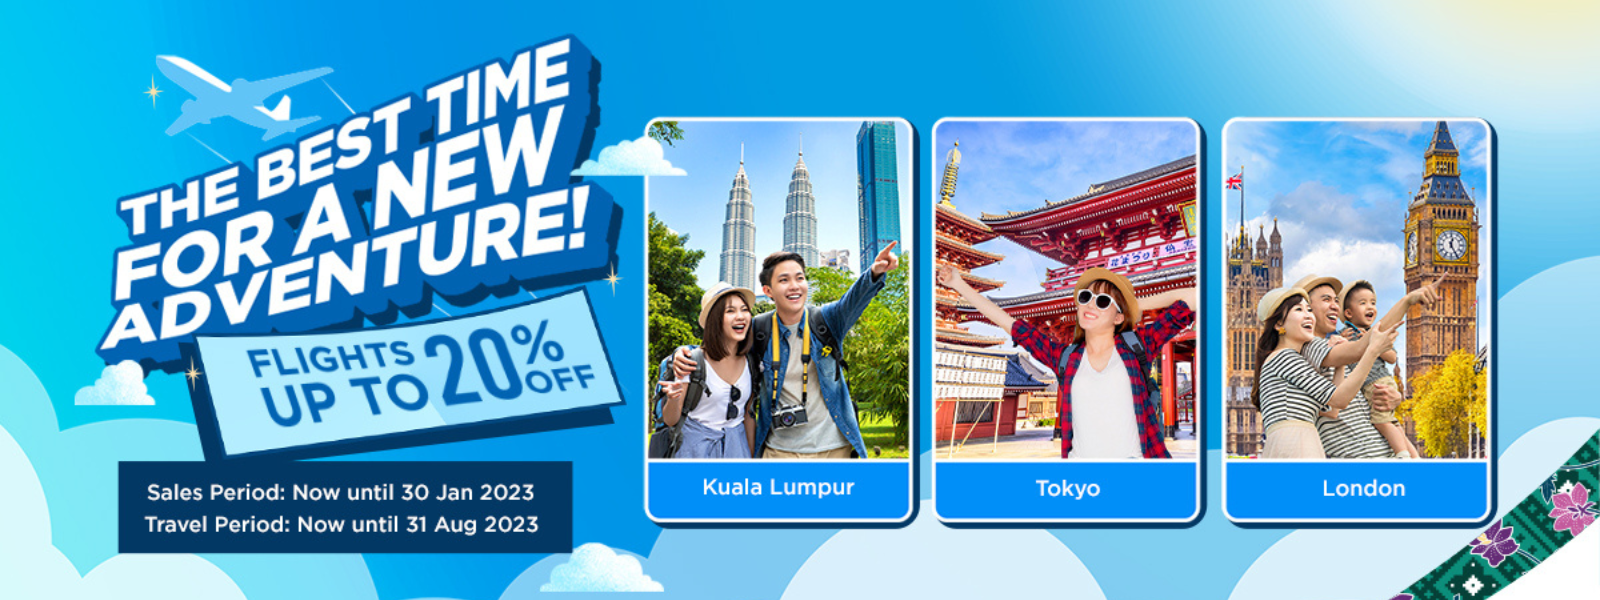 Malaysia Airlines, Travel